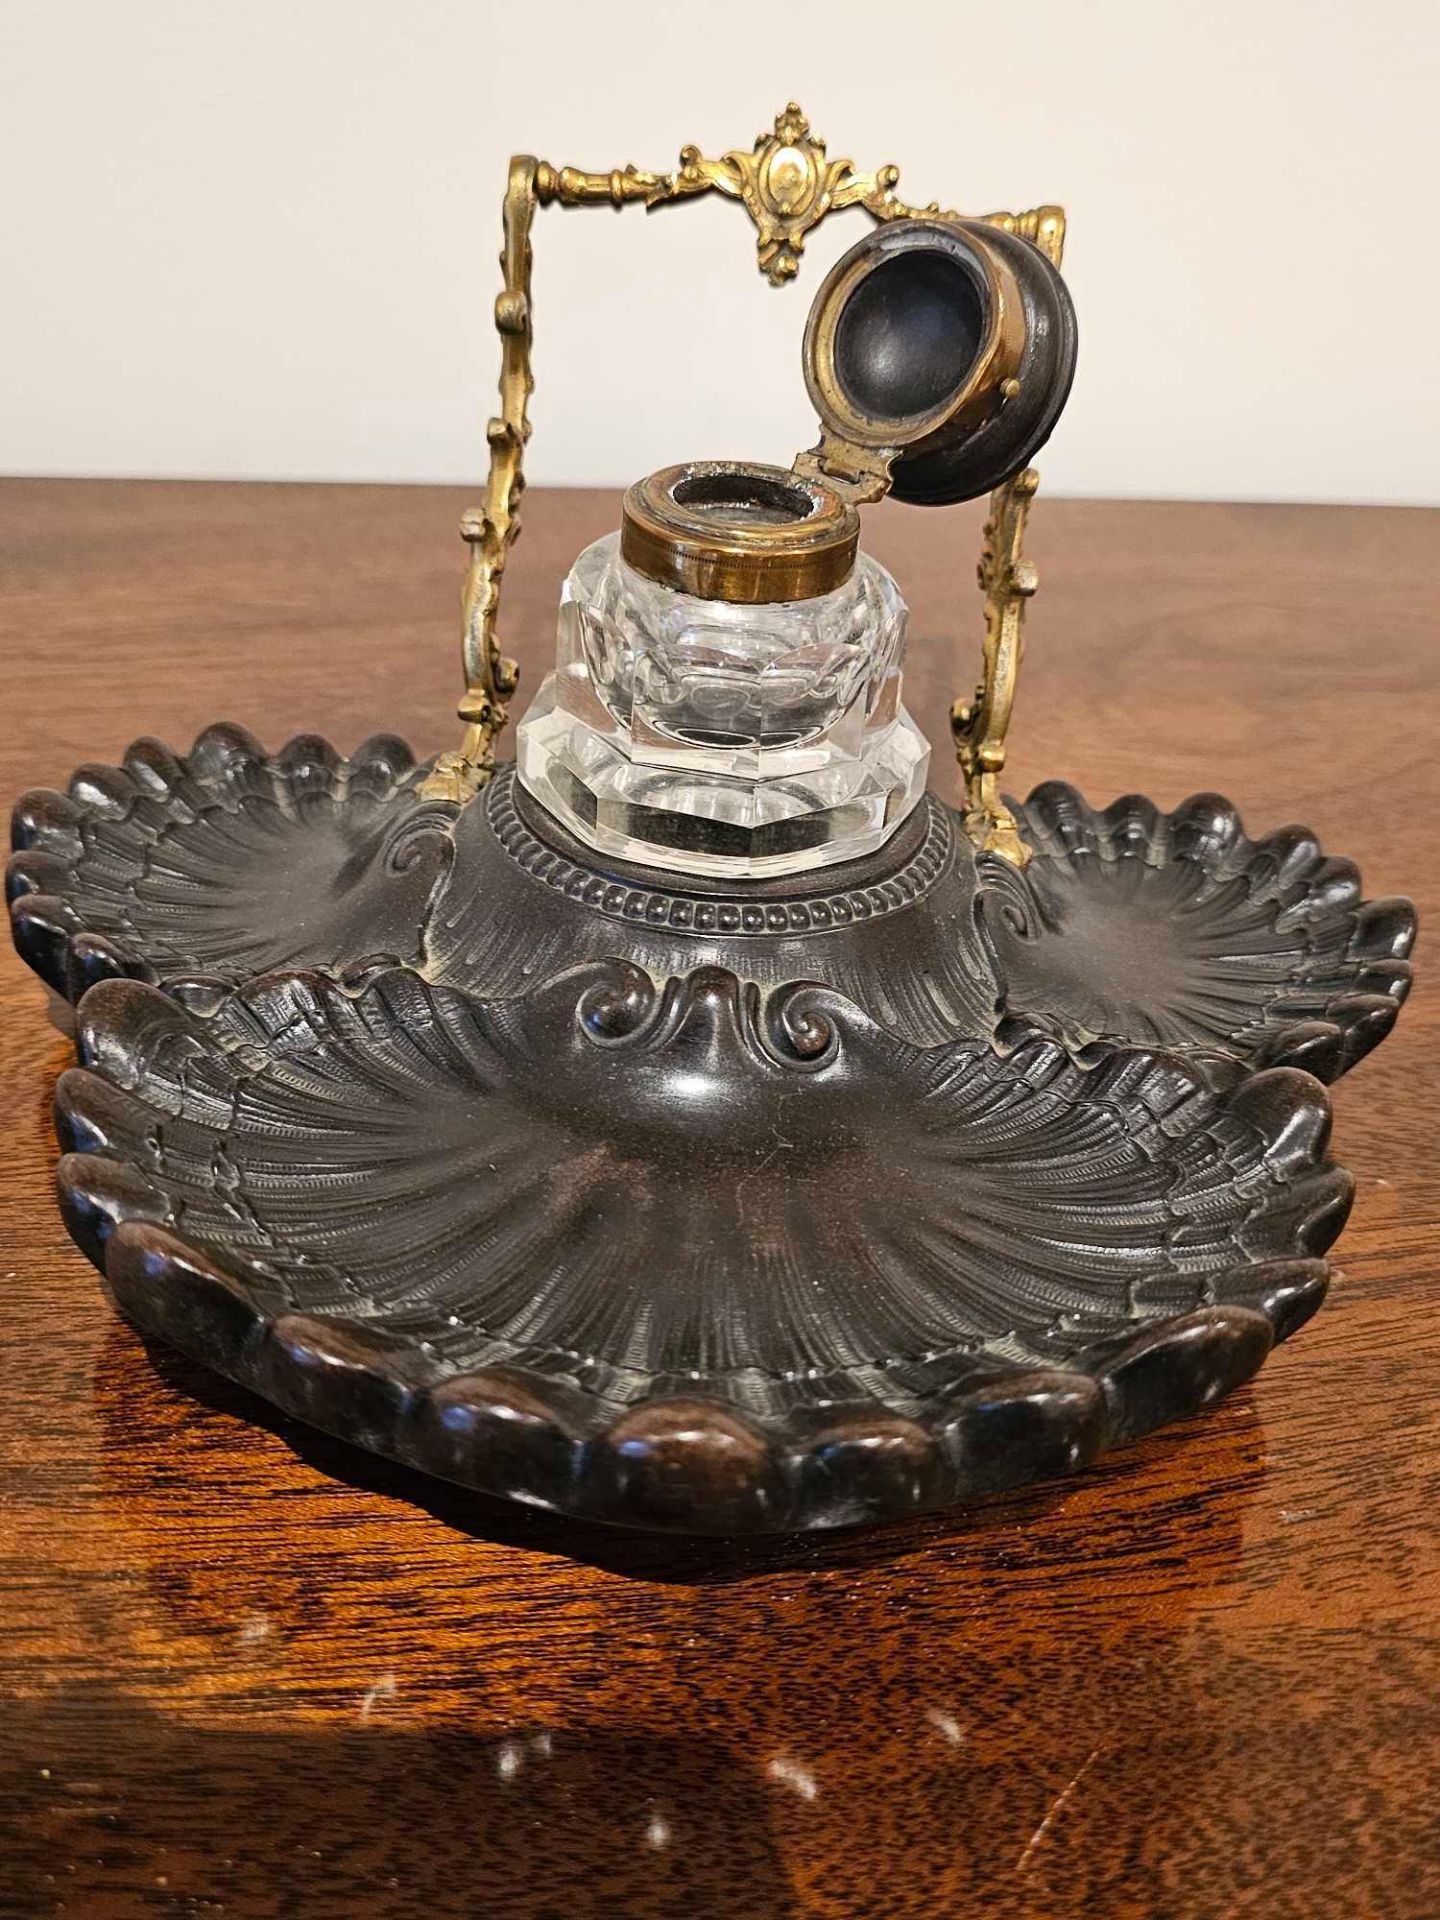 C1860. French Bois Derci Inkwell With Cut Glass Insert And Brass Handle - Image 4 of 4